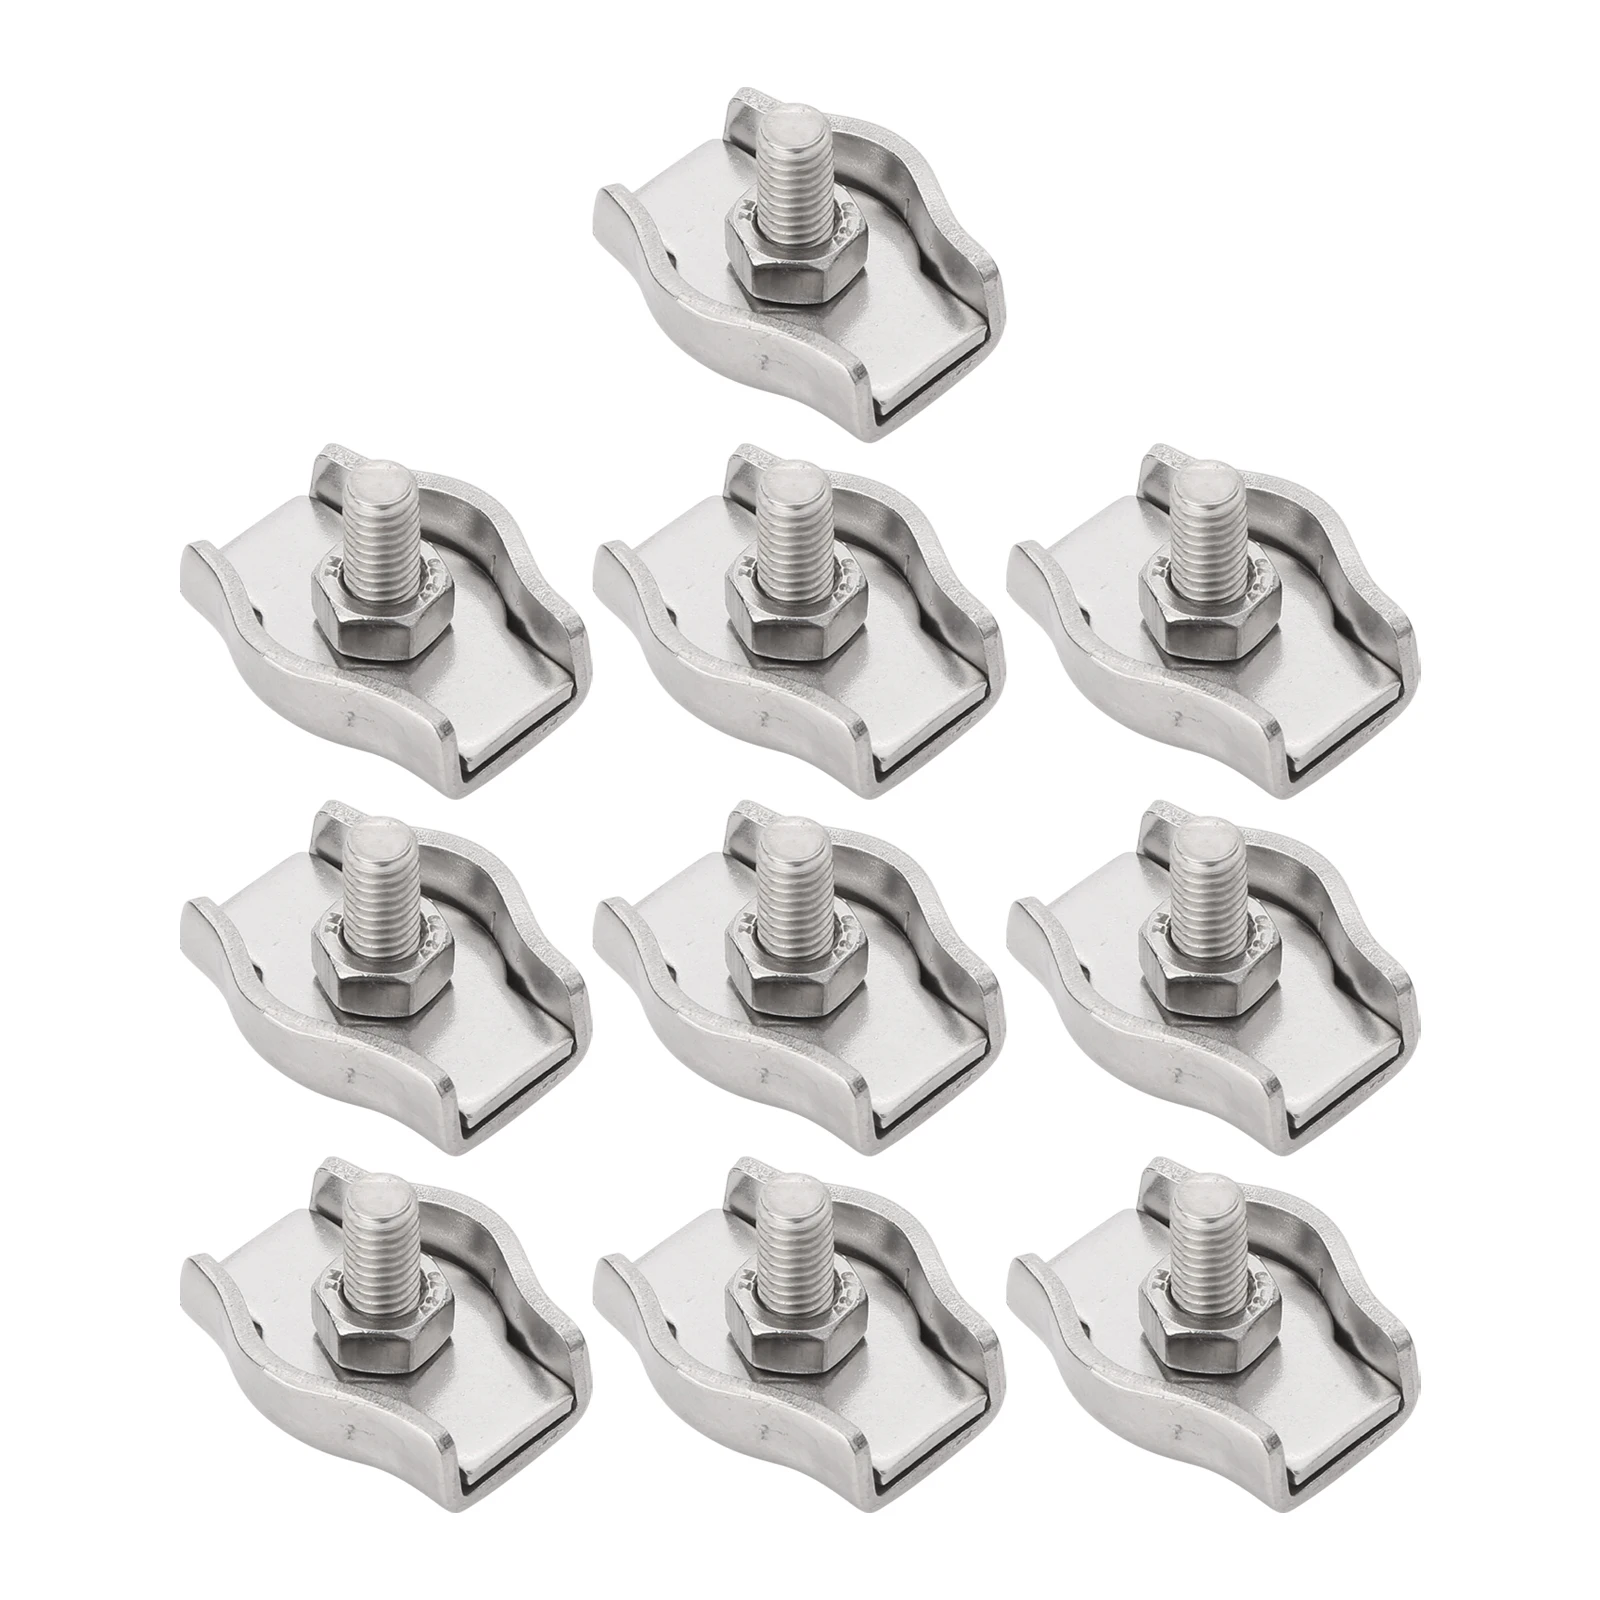 

10Pcs 304 Stainless Steel Wire Rope Clips Single Grips Cable Clamps M2 M3 M4 M5 M6 For Steel Wires Rope Sturdy Clip Fixing